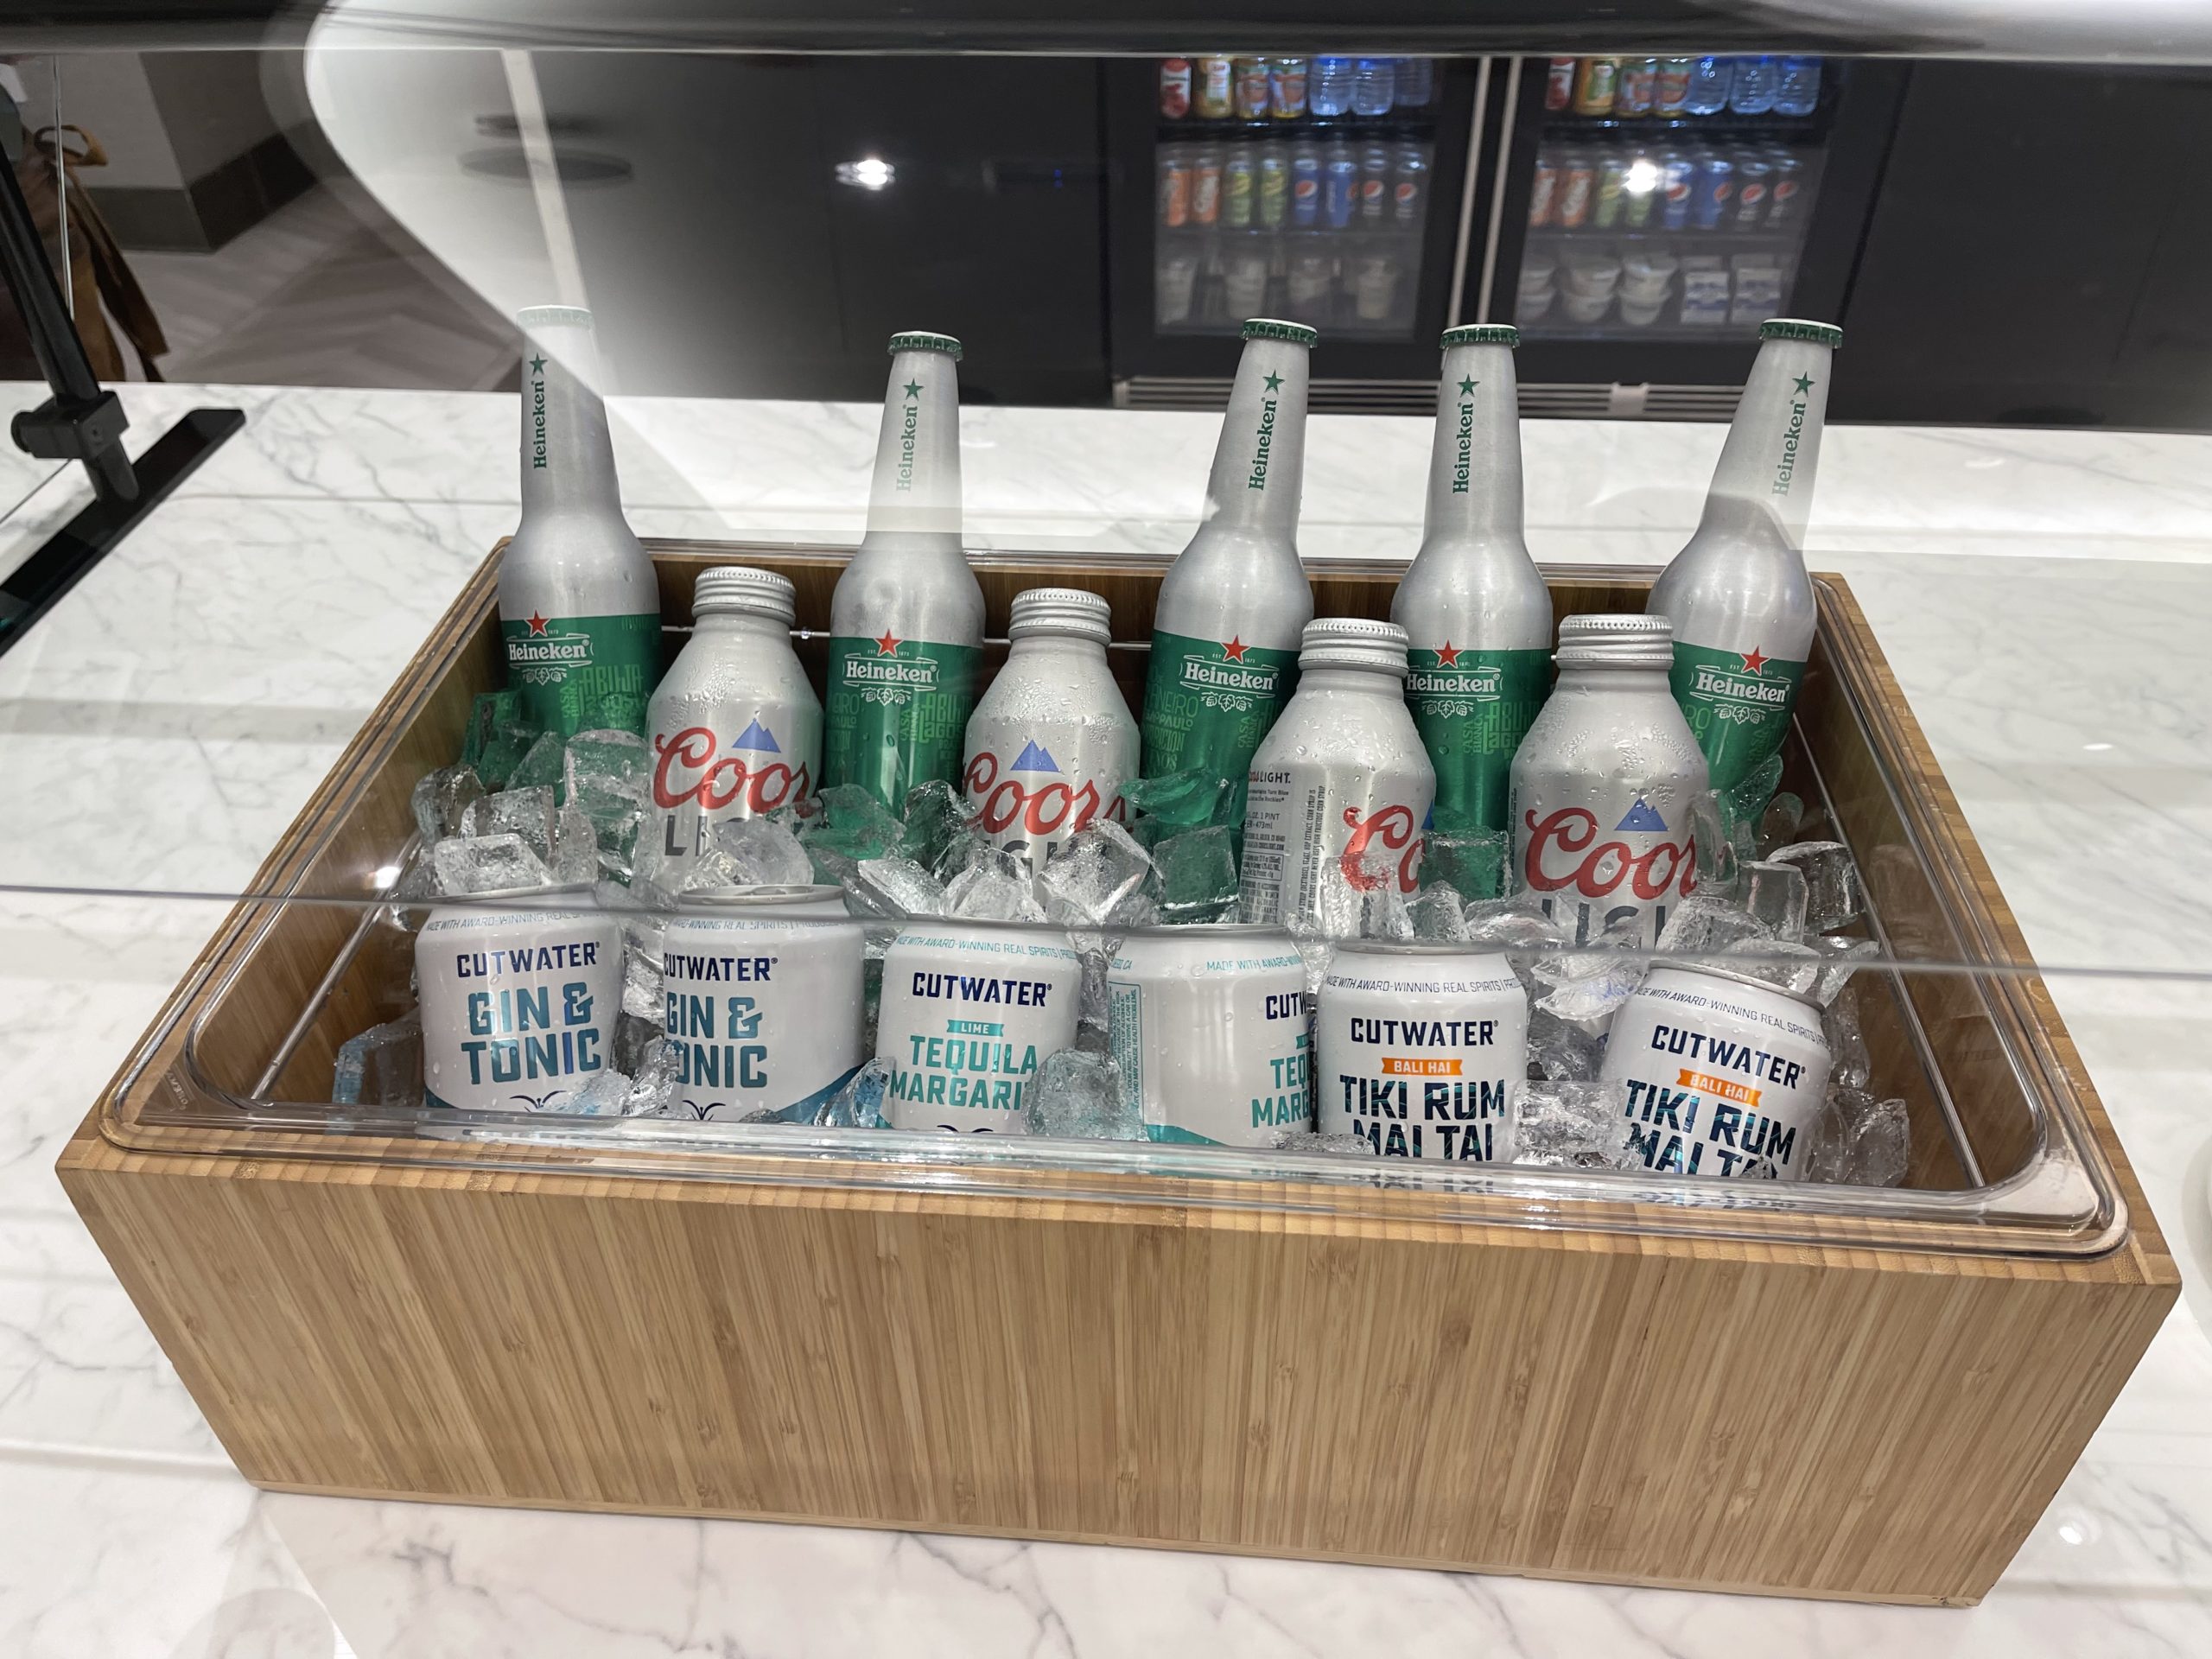 a wooden box with bottles and cans of soda